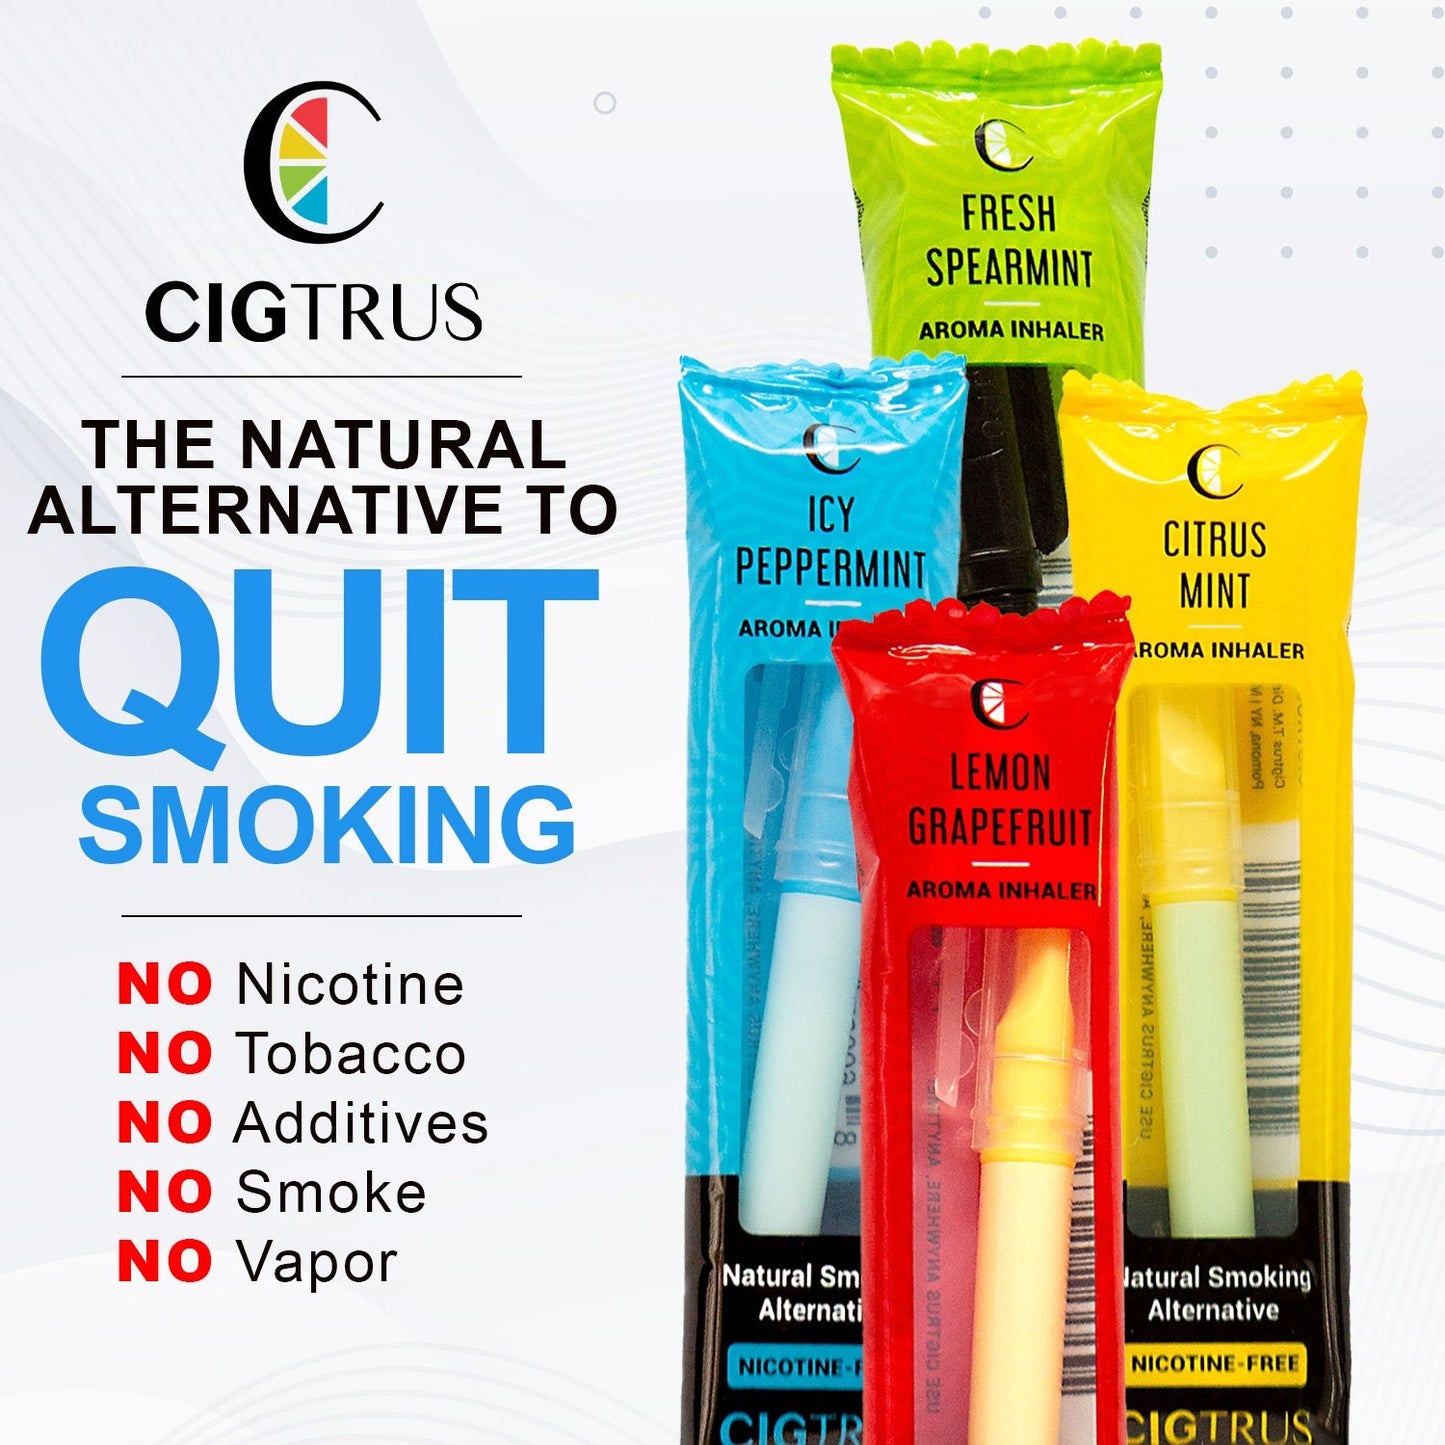 Cigtrus Oxygen Aroma Inhalers - Portable Oral Fixation Relief Aid With Natural Ingredients & Plant Oils - Non-Electric Stop Smoking Inhaler - No Tobacco Or Nicotine - 4 Flavor 5 Each Variety Box Of 20 - cigtrus.comcigtrus.com